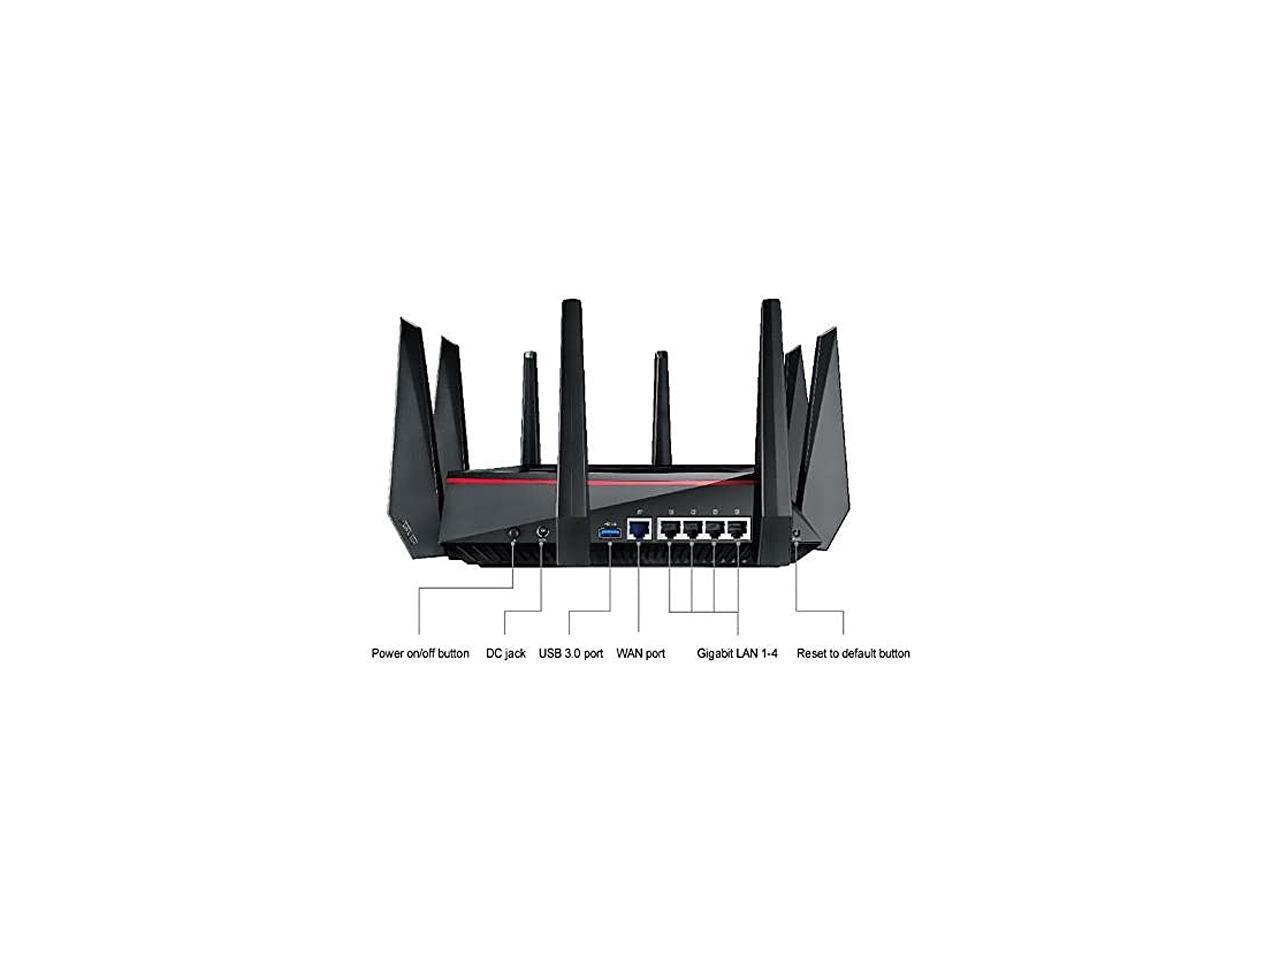 ASUS AC5300 Wi-Fi Tri-band Gigabit Wireless Router with 4x4 MU-MIMO, 4 x LAN Ports, AiProtection Network Security and WTFast Game Accelerator, AiMesh Whole Home Wi-Fi System Compatible (RT-AC5300)